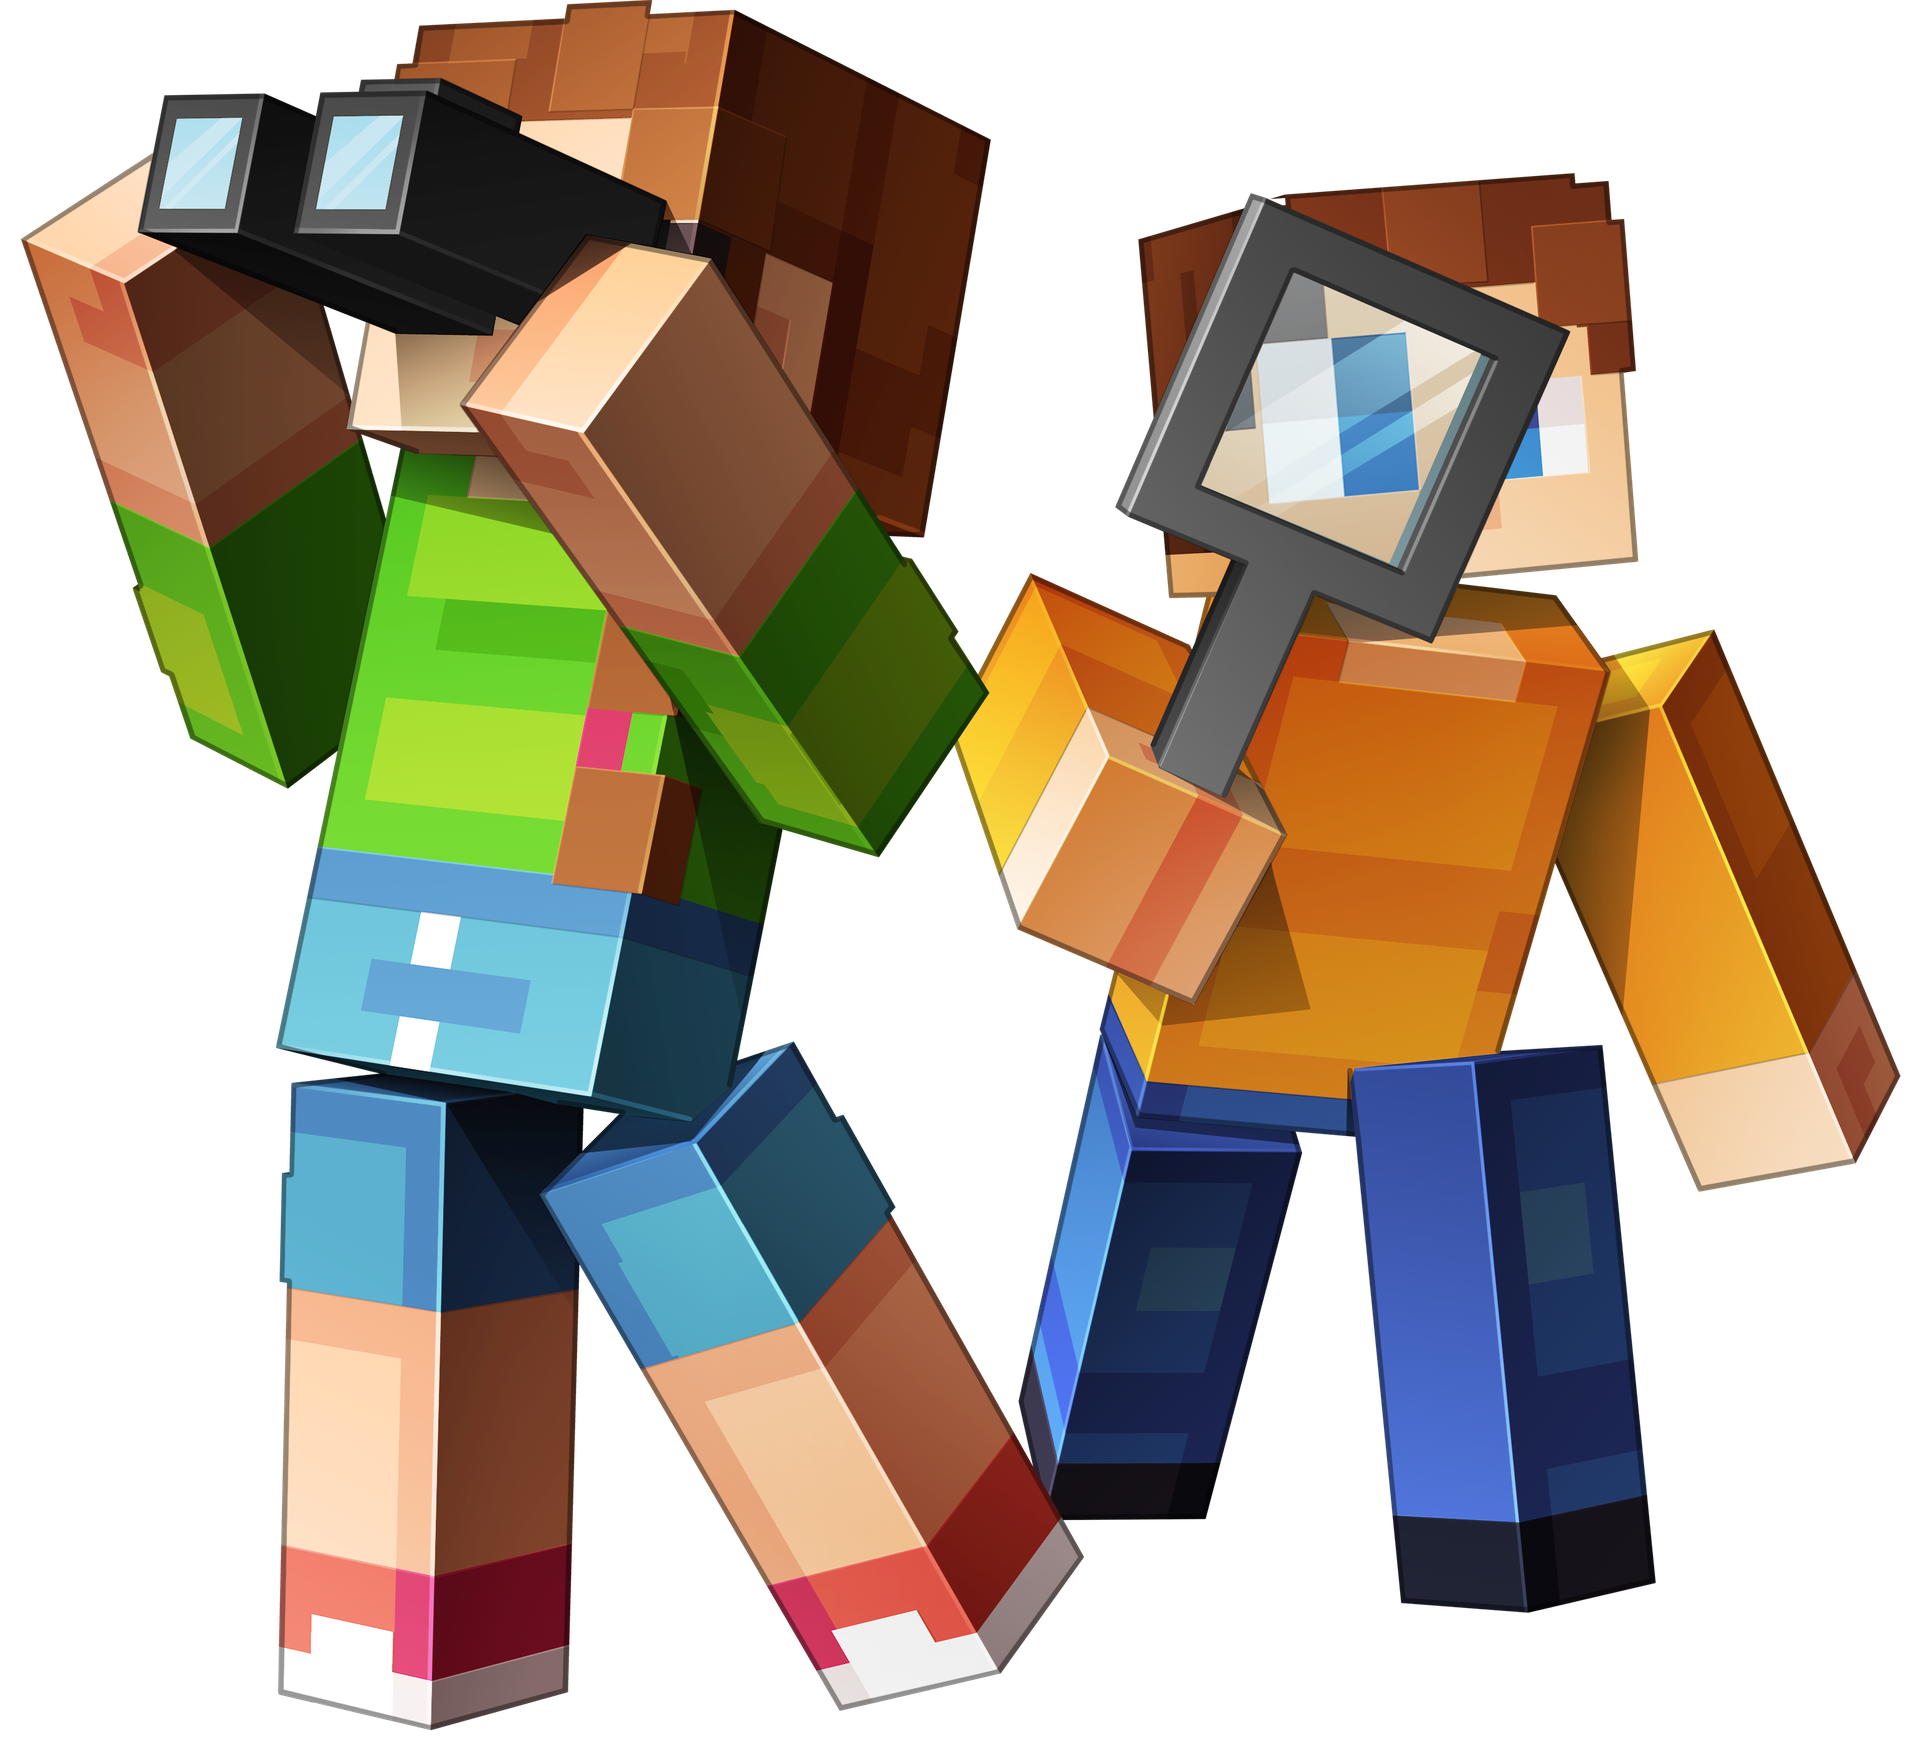 Two Minecraft characters in search of an answer.